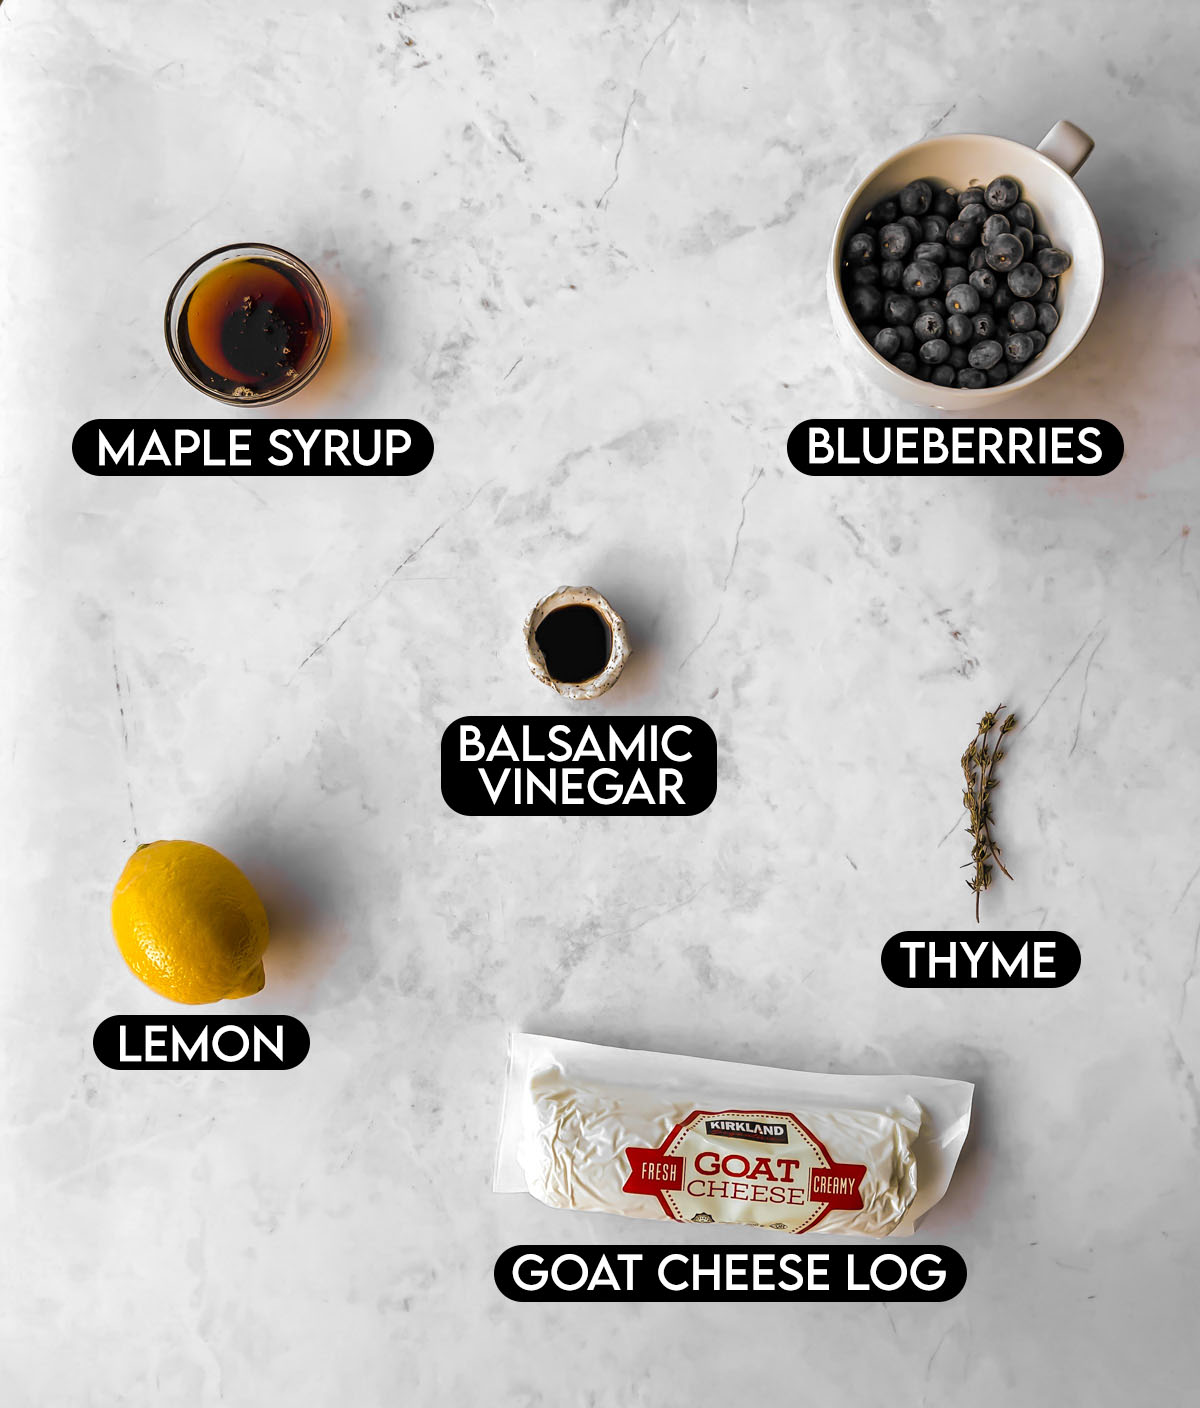 Labeled ingredients for Blueberry Goat Cheese Log.